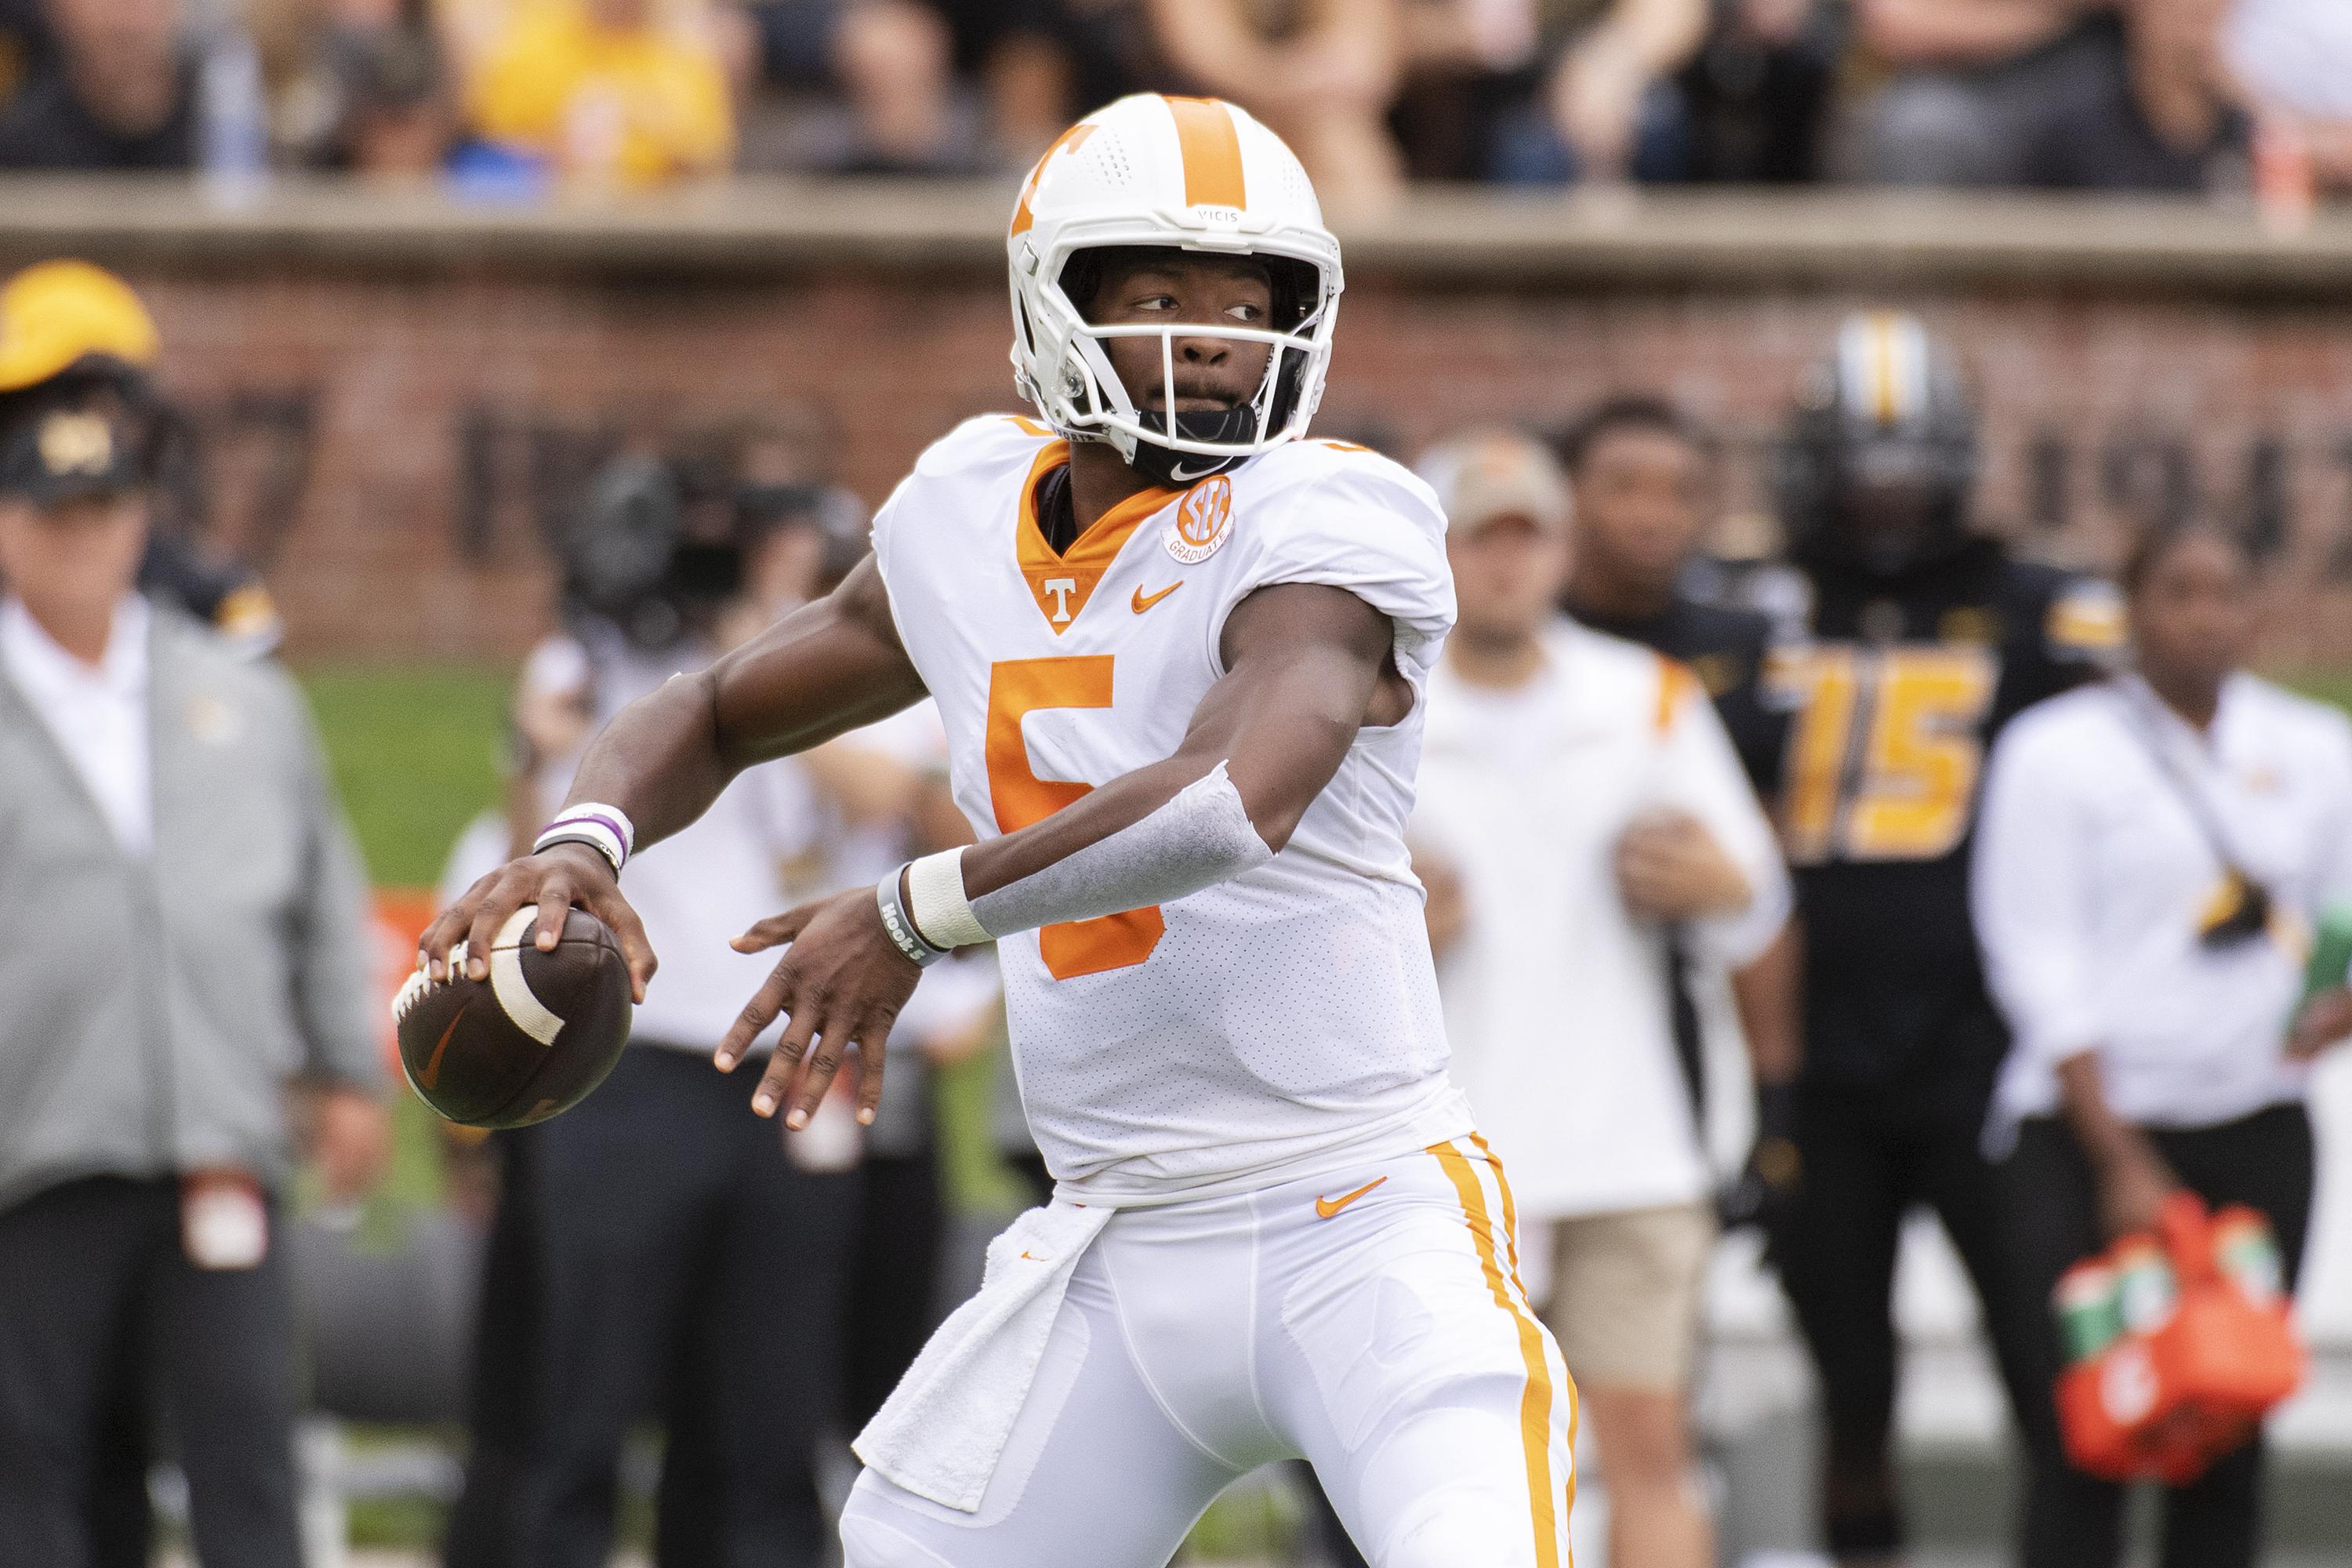 Tennessee Volunteer's Quarterback Hendon Hooker looks to continue to improve and increase his NFL Draft stock